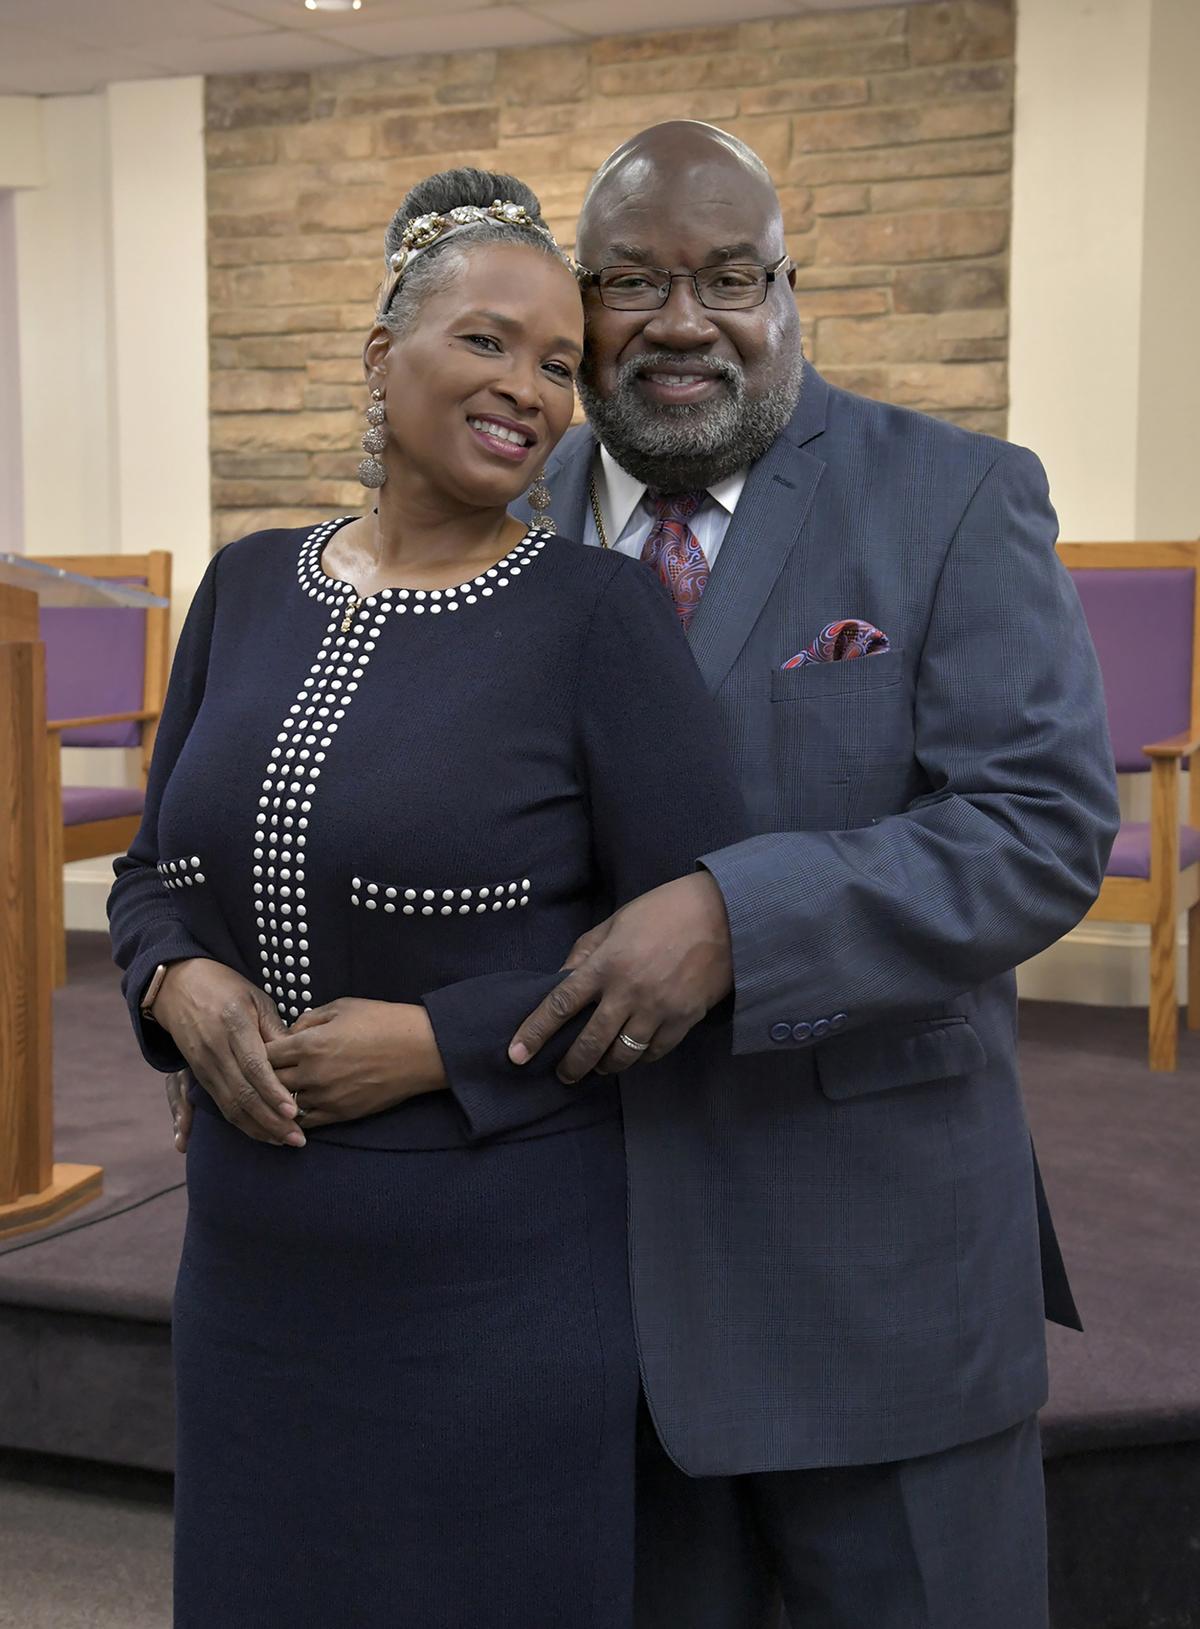 Lady Hope McMillan with her husband, Bishop William E. McMillan on Palm Sunday at their Pentecostal church, Rehobeth Ministries Church of God in Christ, in the Parklane neighborhood. (Amy Davis/Baltimore Sun/TNS)